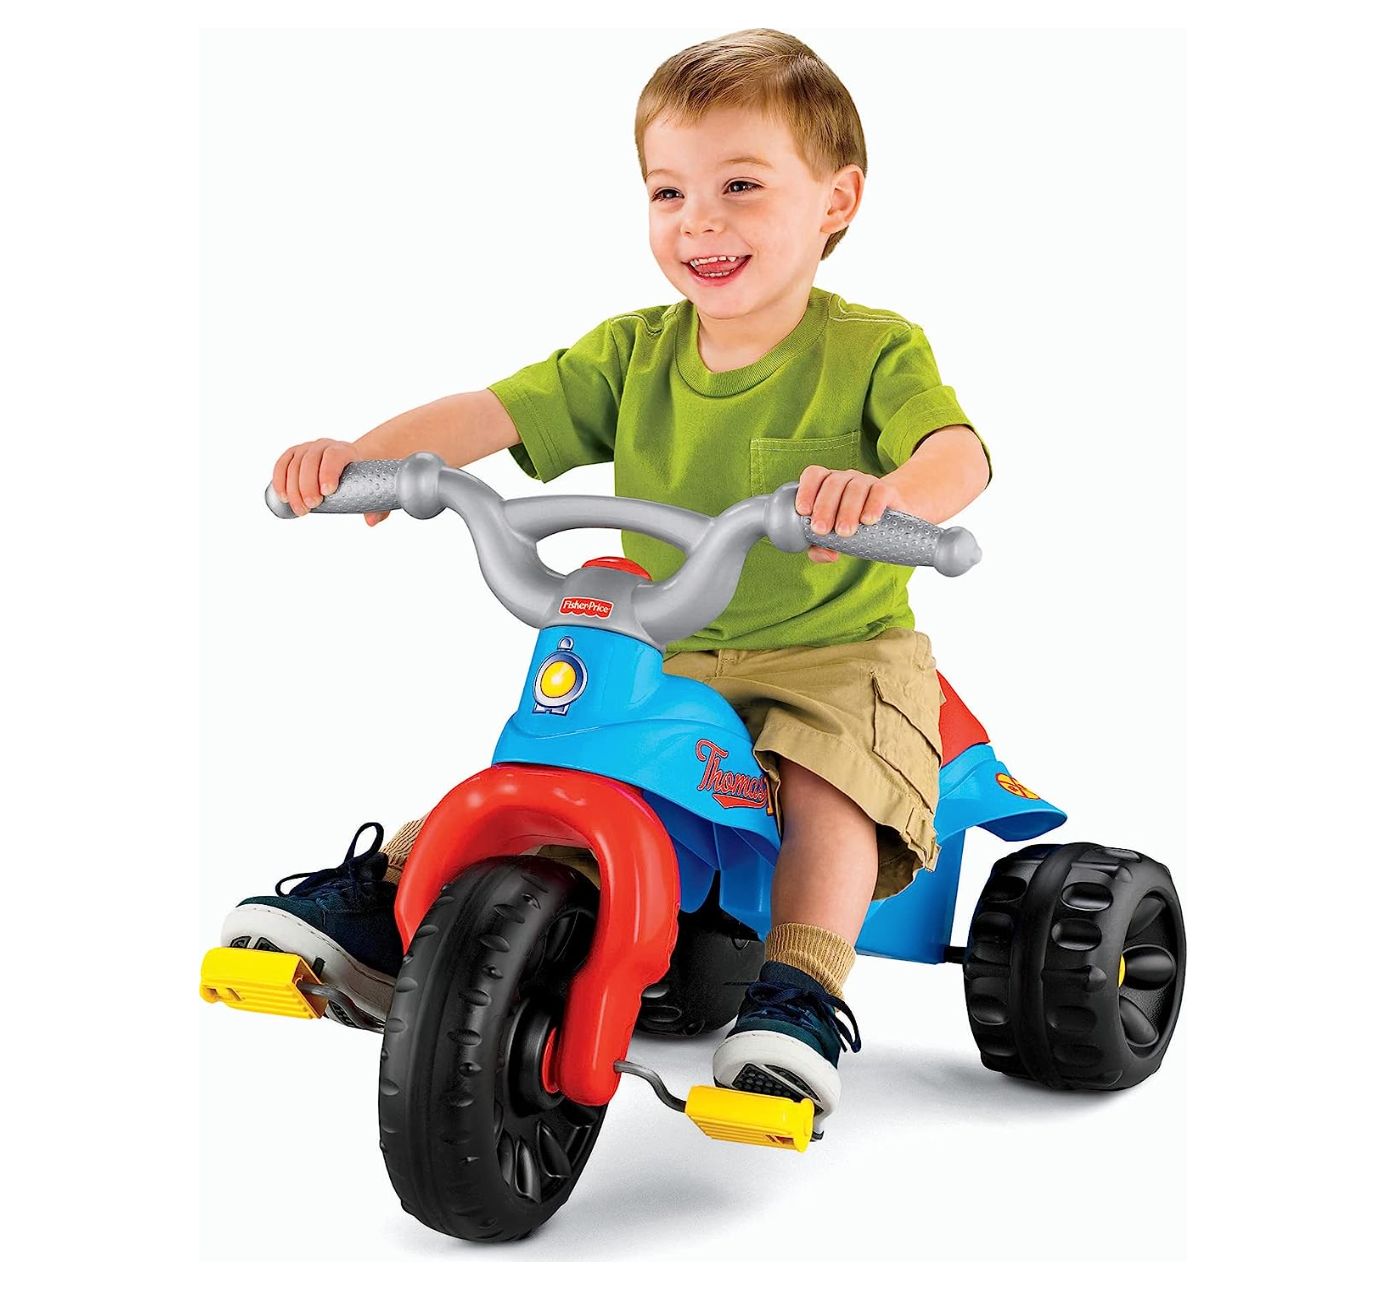 Fisher-Price Thomas & Friends Toddler Tricycle Tough Trike Bike with Handlebar Grips and Storage for Preschool Kids